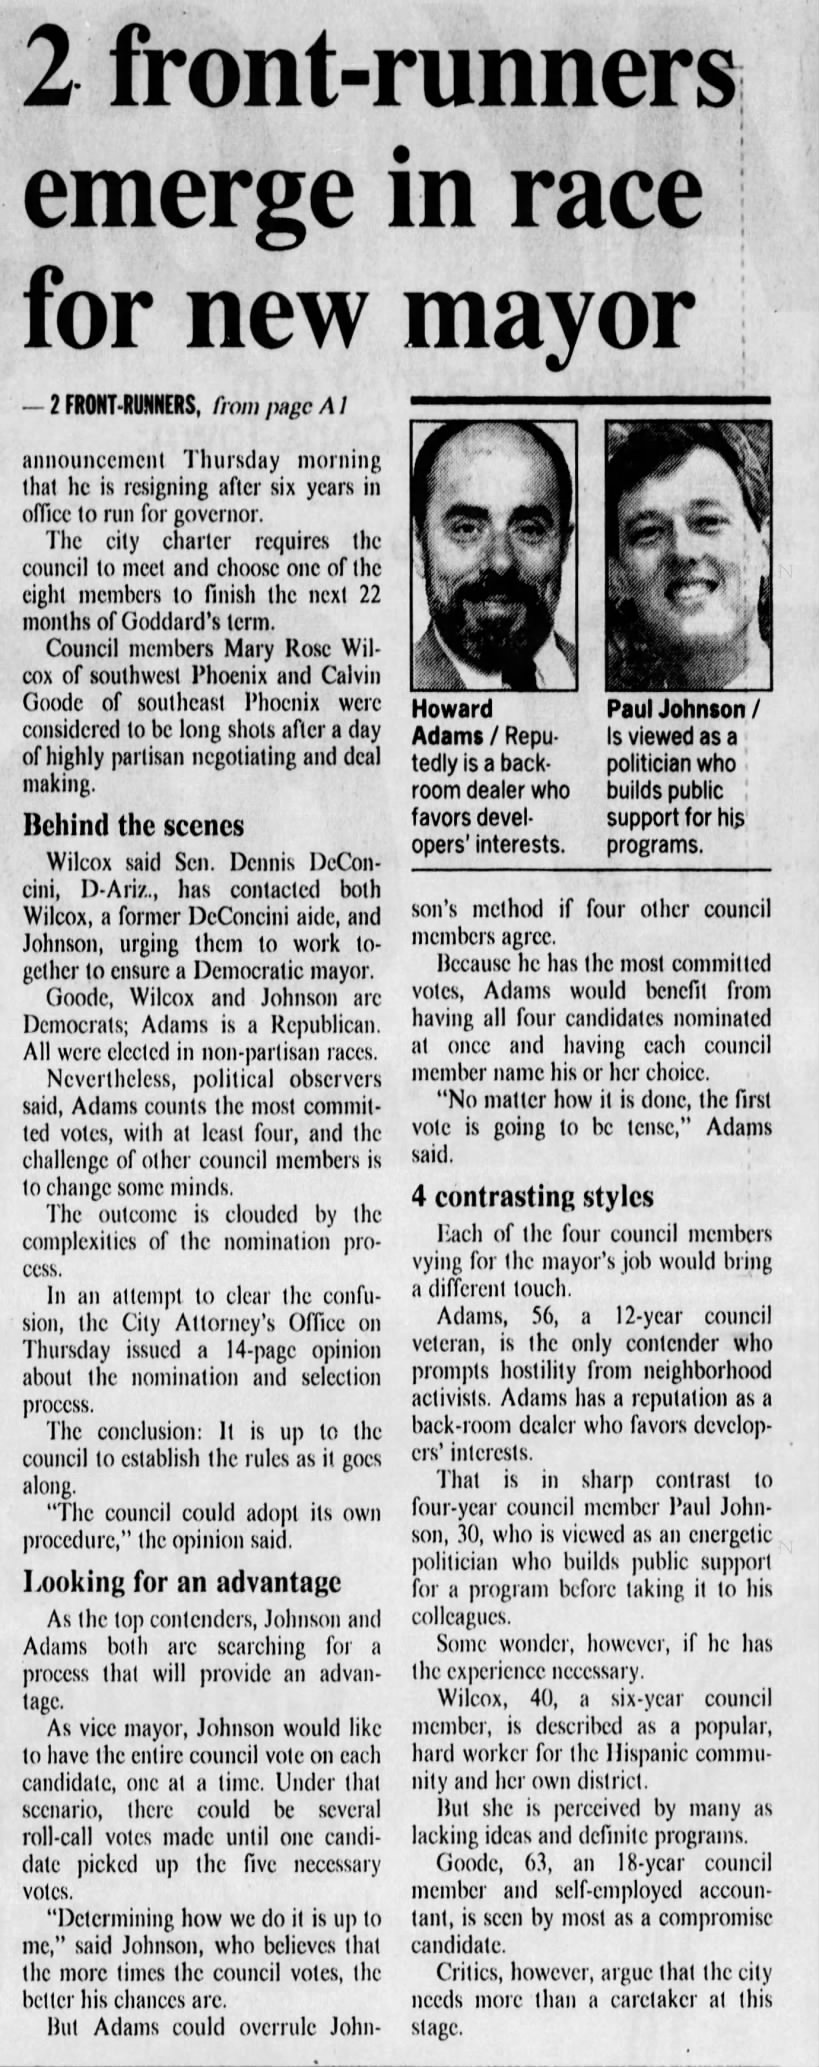 "2 front-runners emerge in race for new mayor" (Feb 16, 1990)